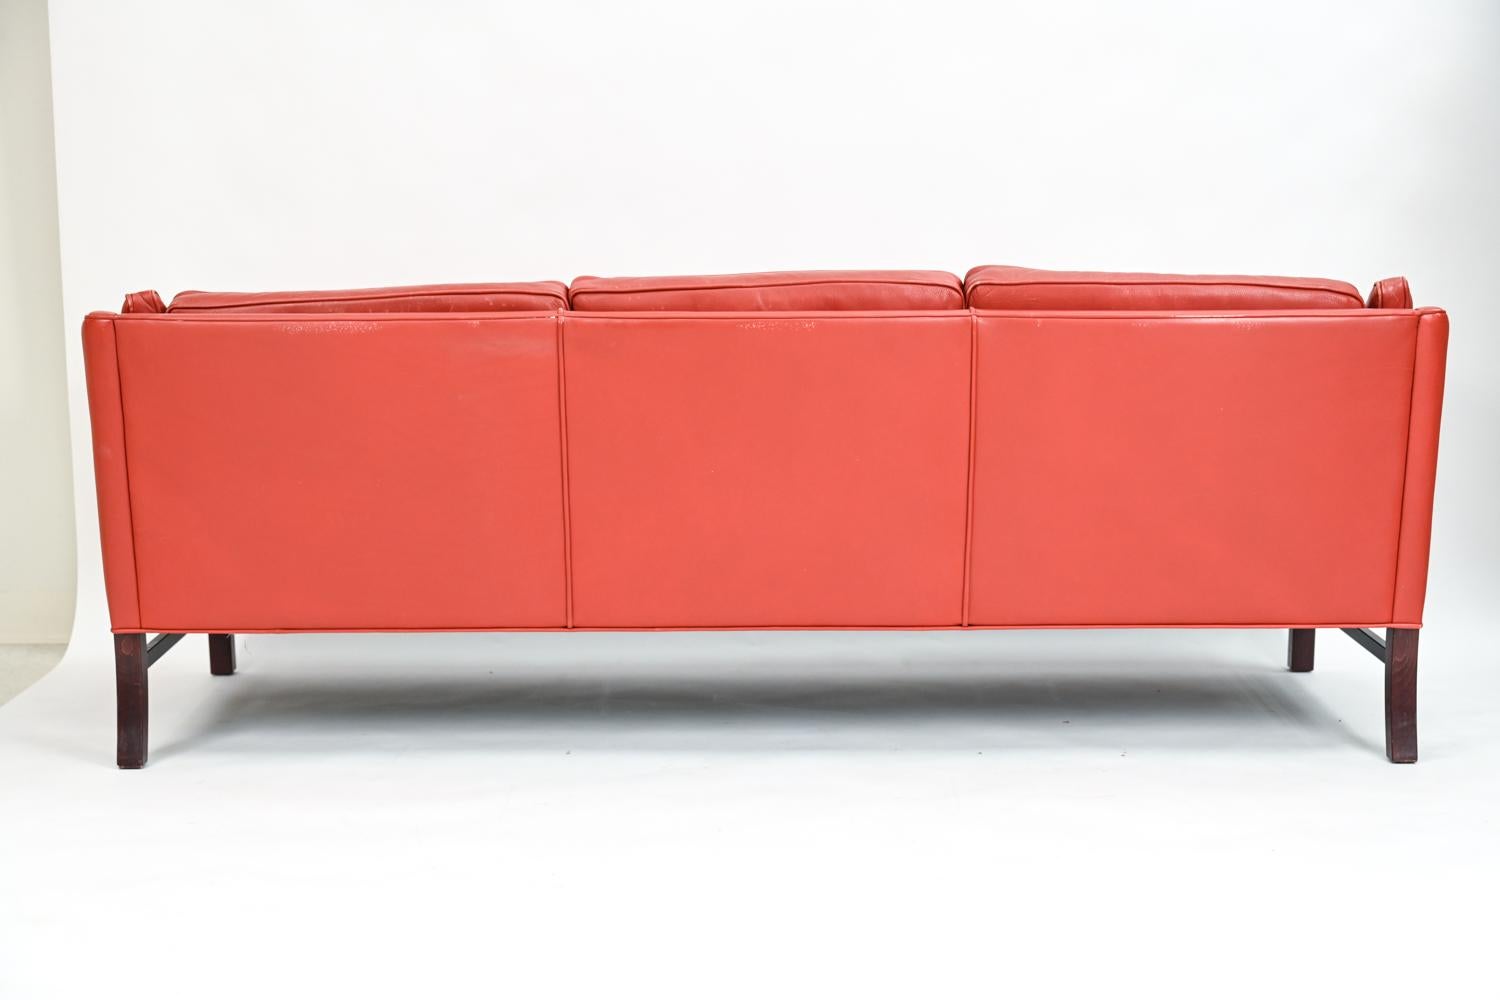 Danish Modern Leather Sofa Suite by Grant Mobelfabrik, c. 1970's For Sale 1